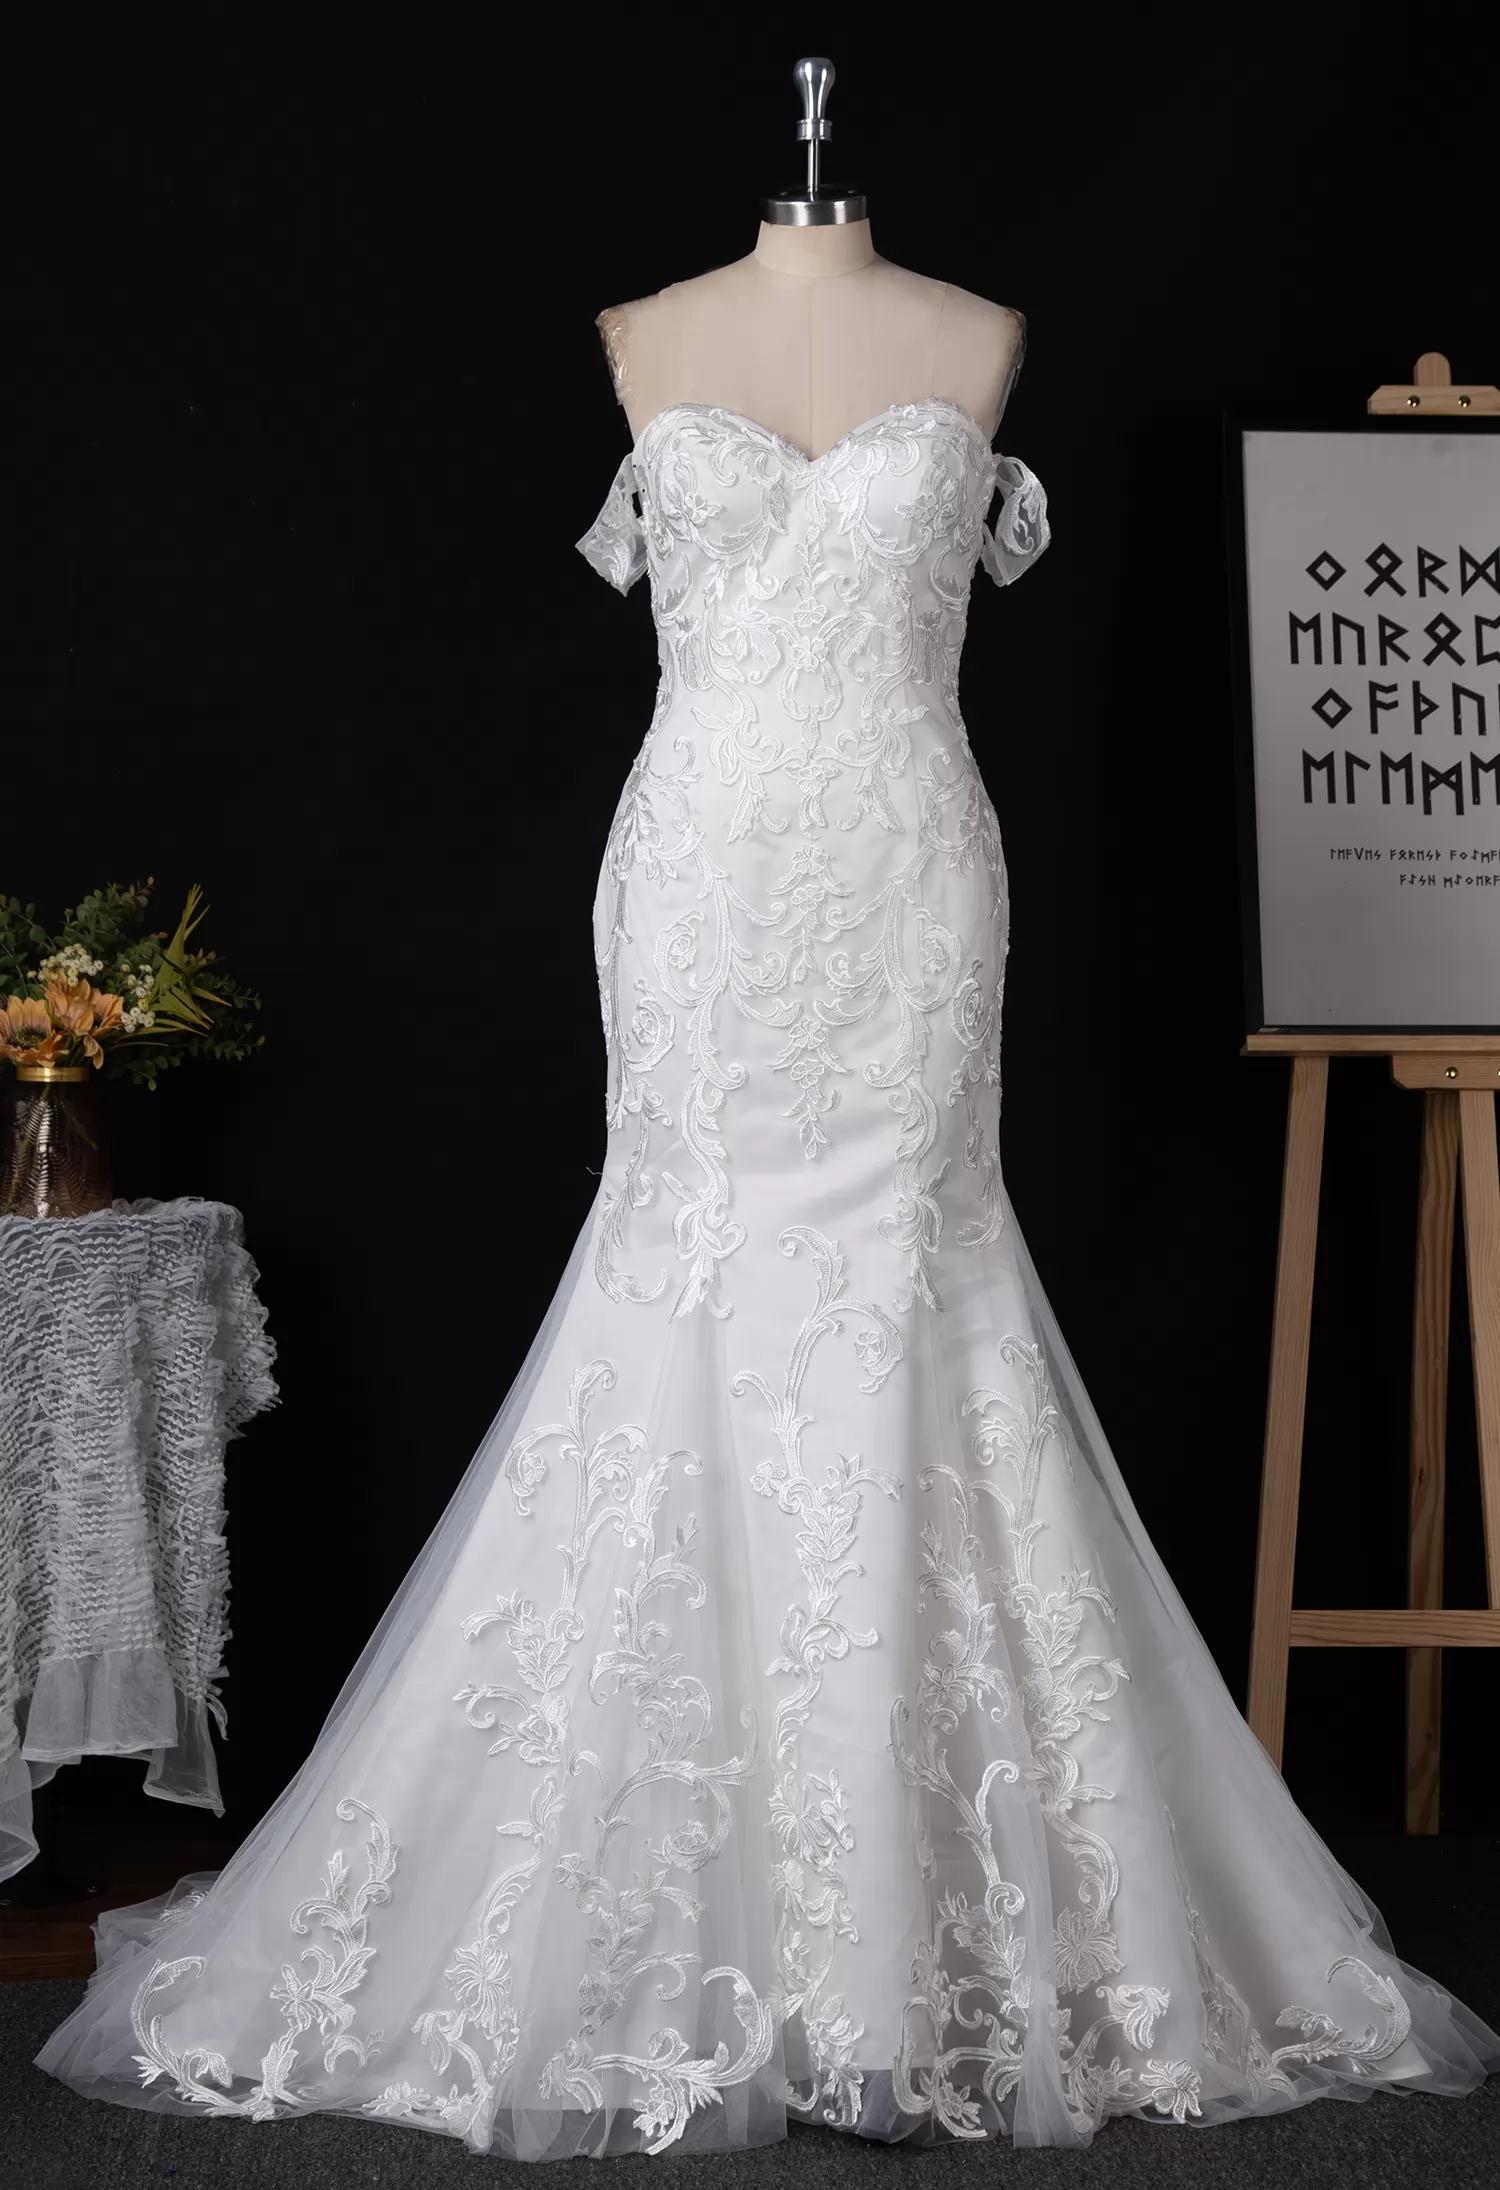 Sweetheart Lace Mermaid Wedding Dress With Off-the-Shoulder Straps